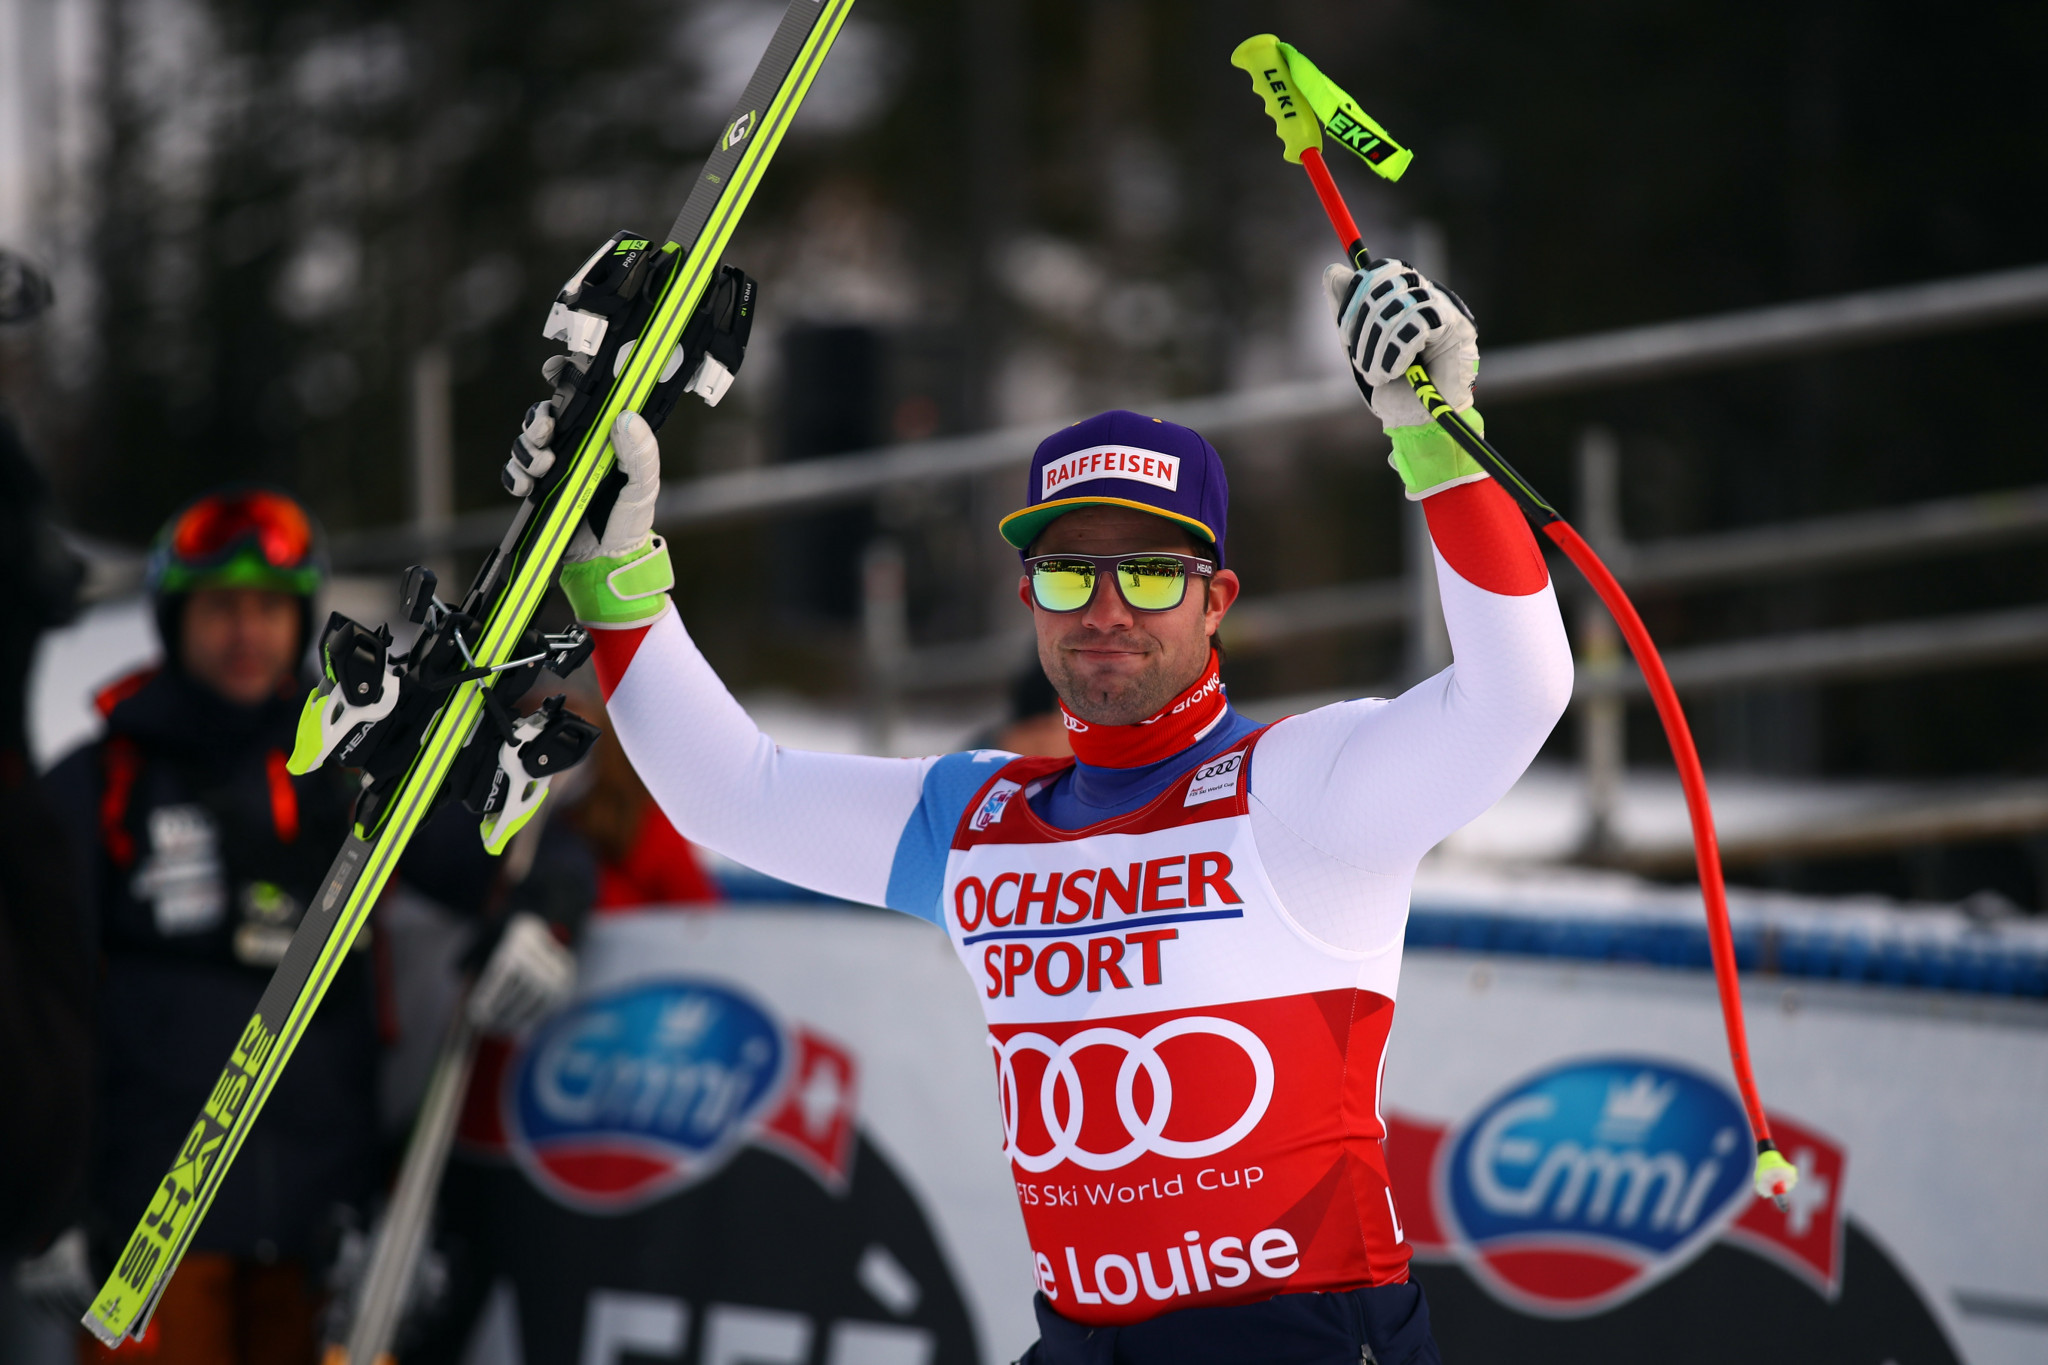 World champion Beat Feuz of Switzerland won the season-opening men's downhill event at the FIS Alpine Skiing World Cup in Lake Louise today ©Getty Images